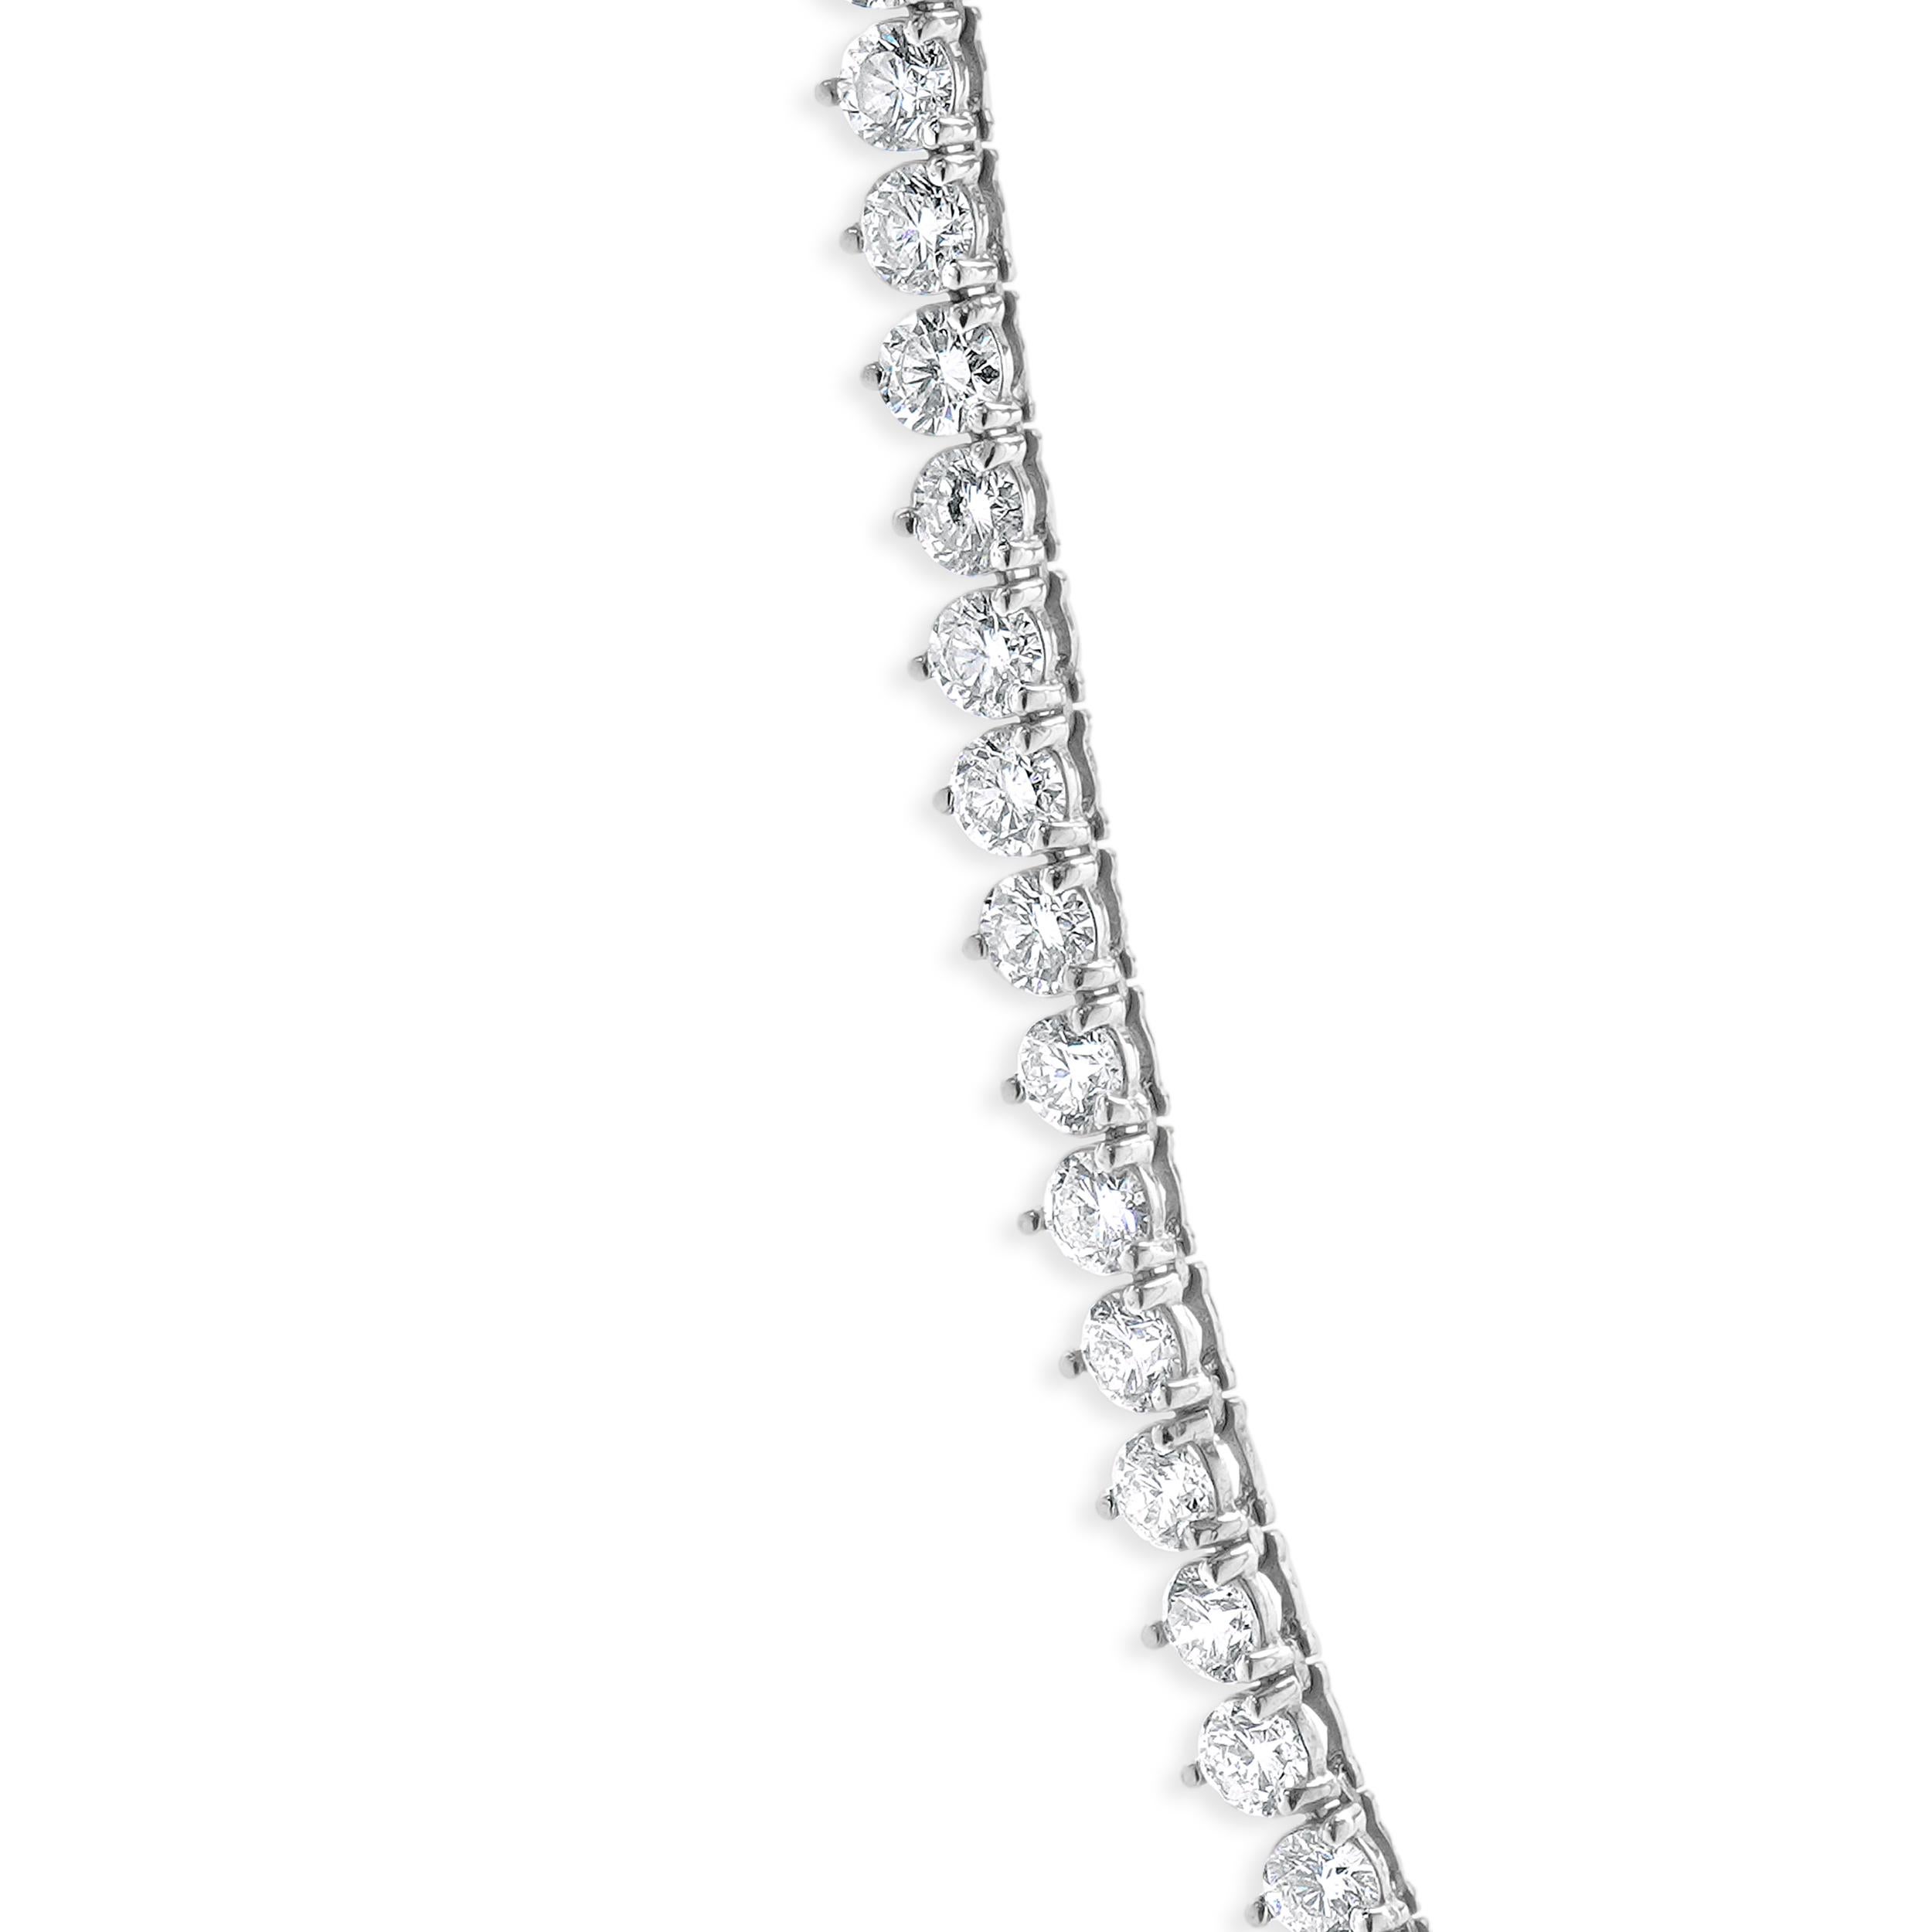 Designer: custom
Material: 14K white gold
Diamonds: 93 round brilliant cut = 14.00cttw
Color: H
Clarity: SI1
Dimensions: necklace measures 14-inches in length
Weight: 17.11 grams